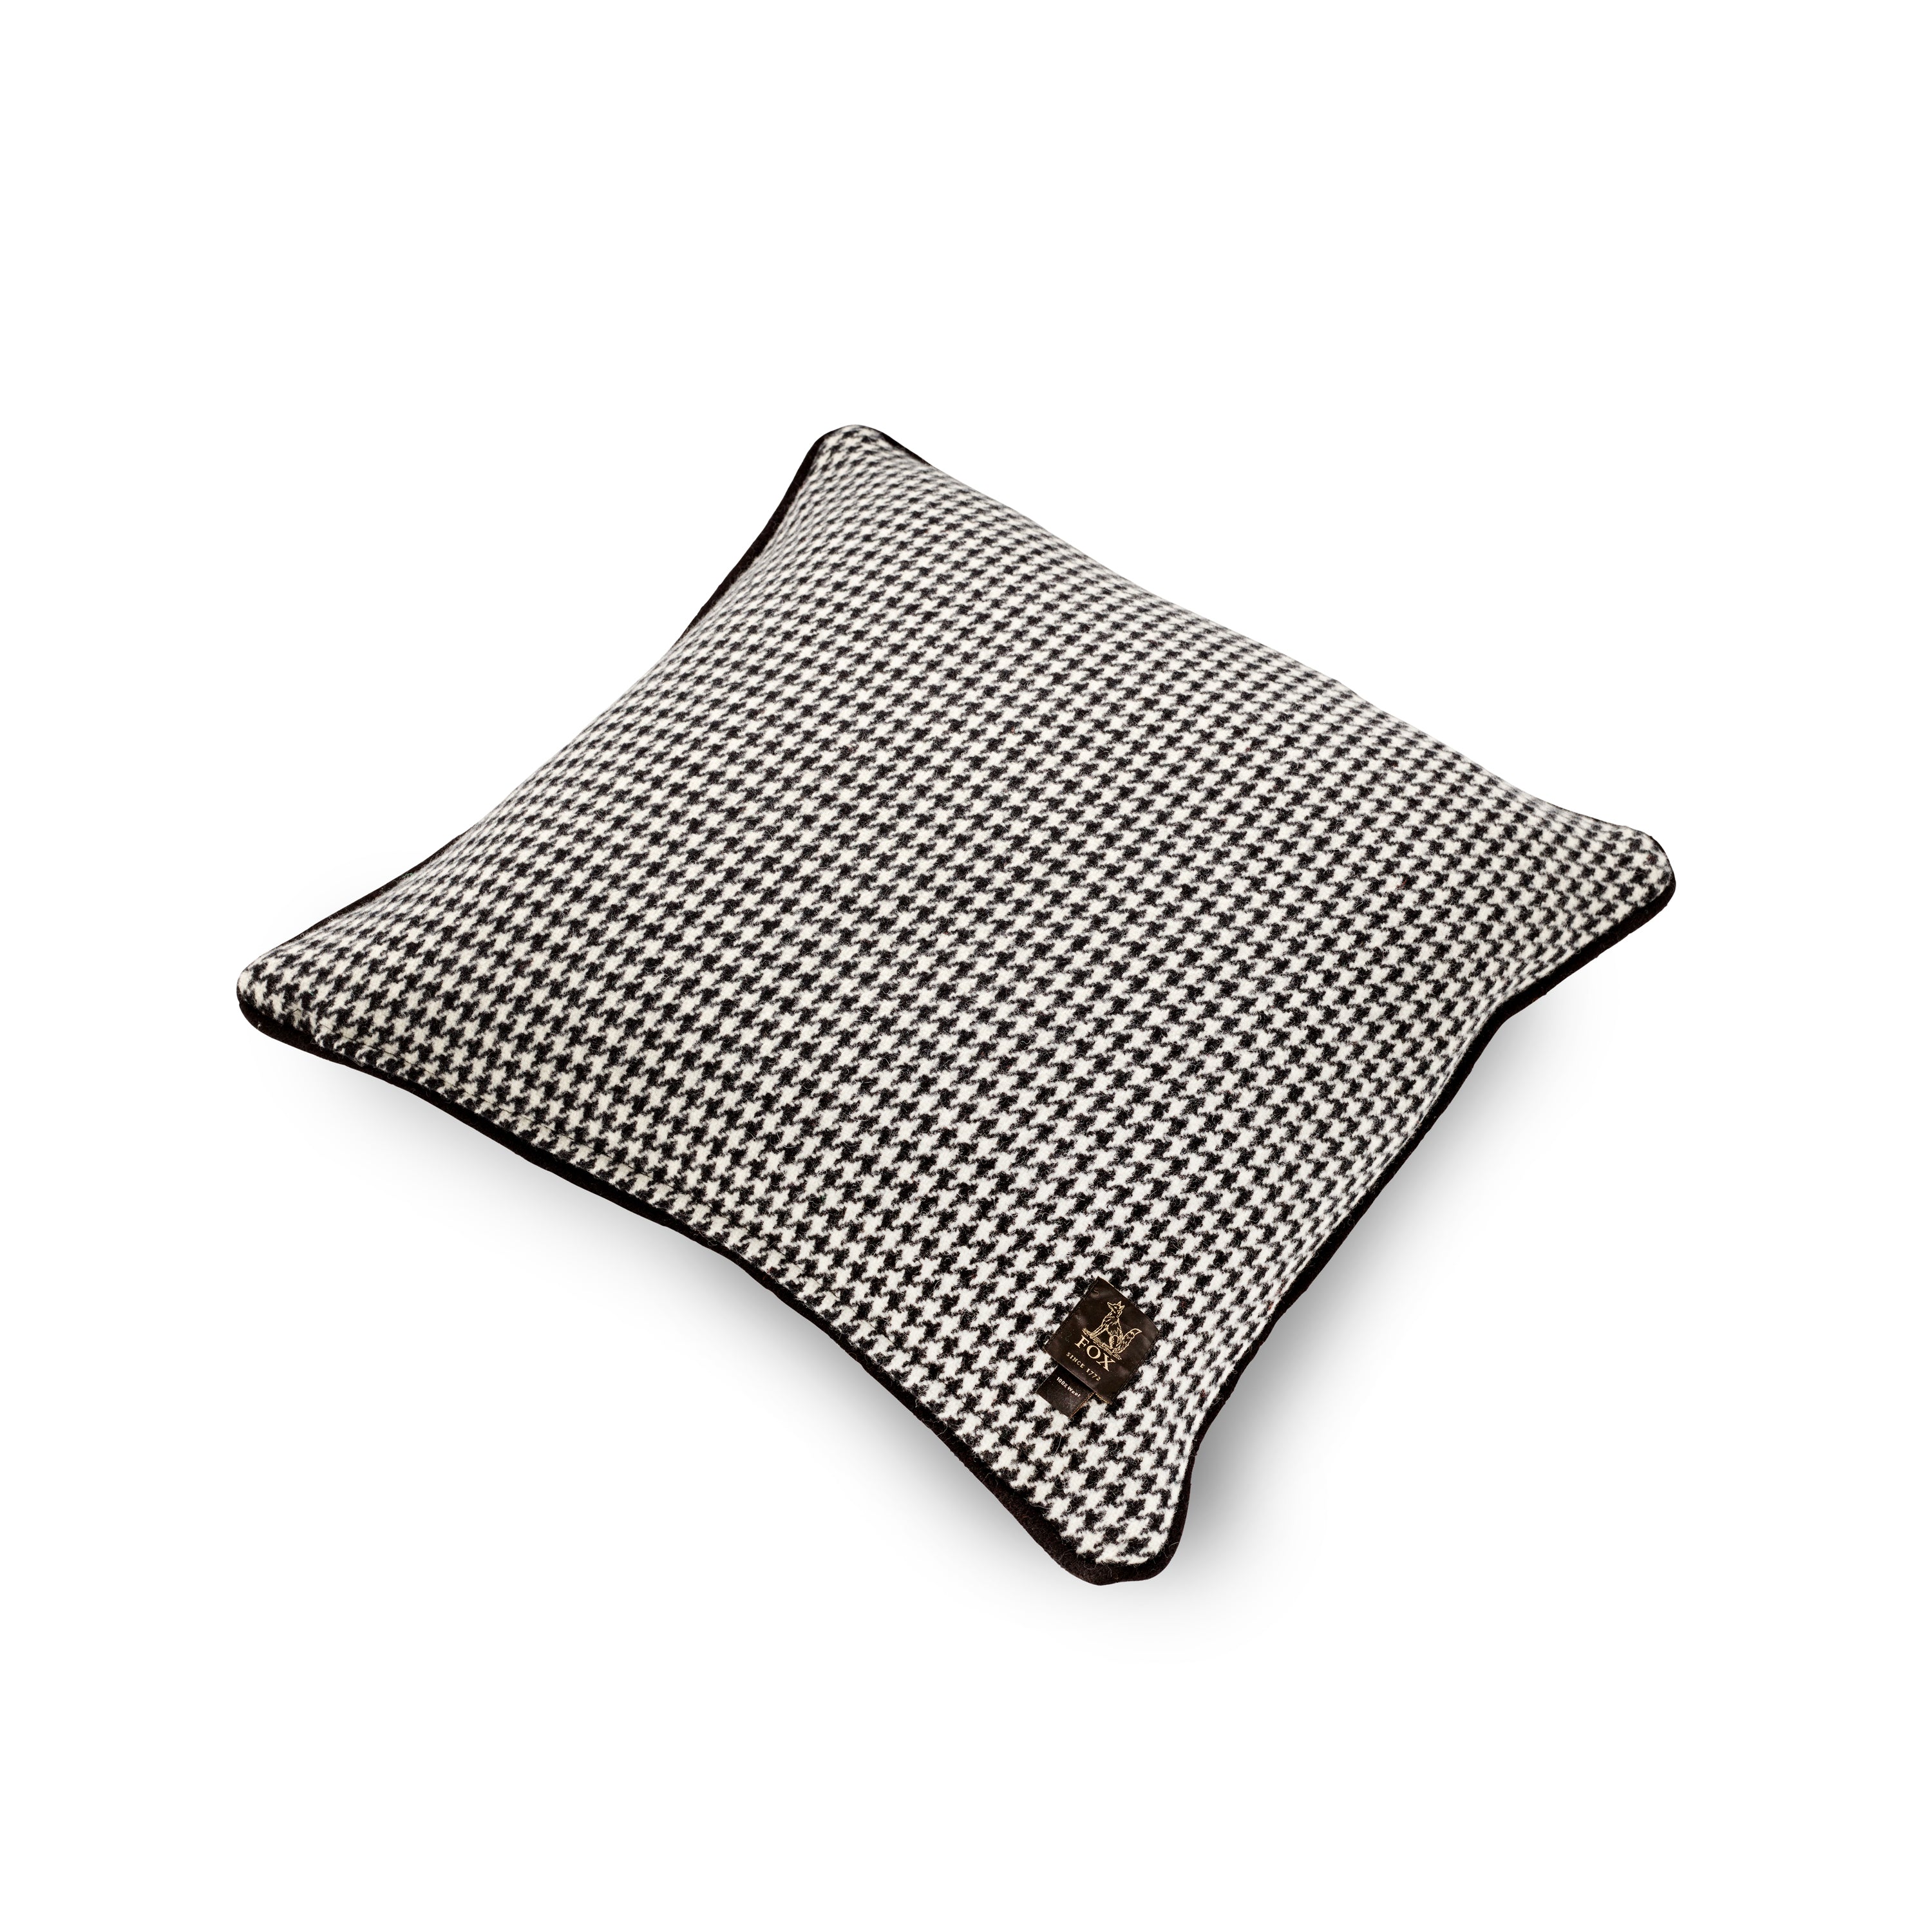 Monochrome Houndstooth with Black Cushion Cover